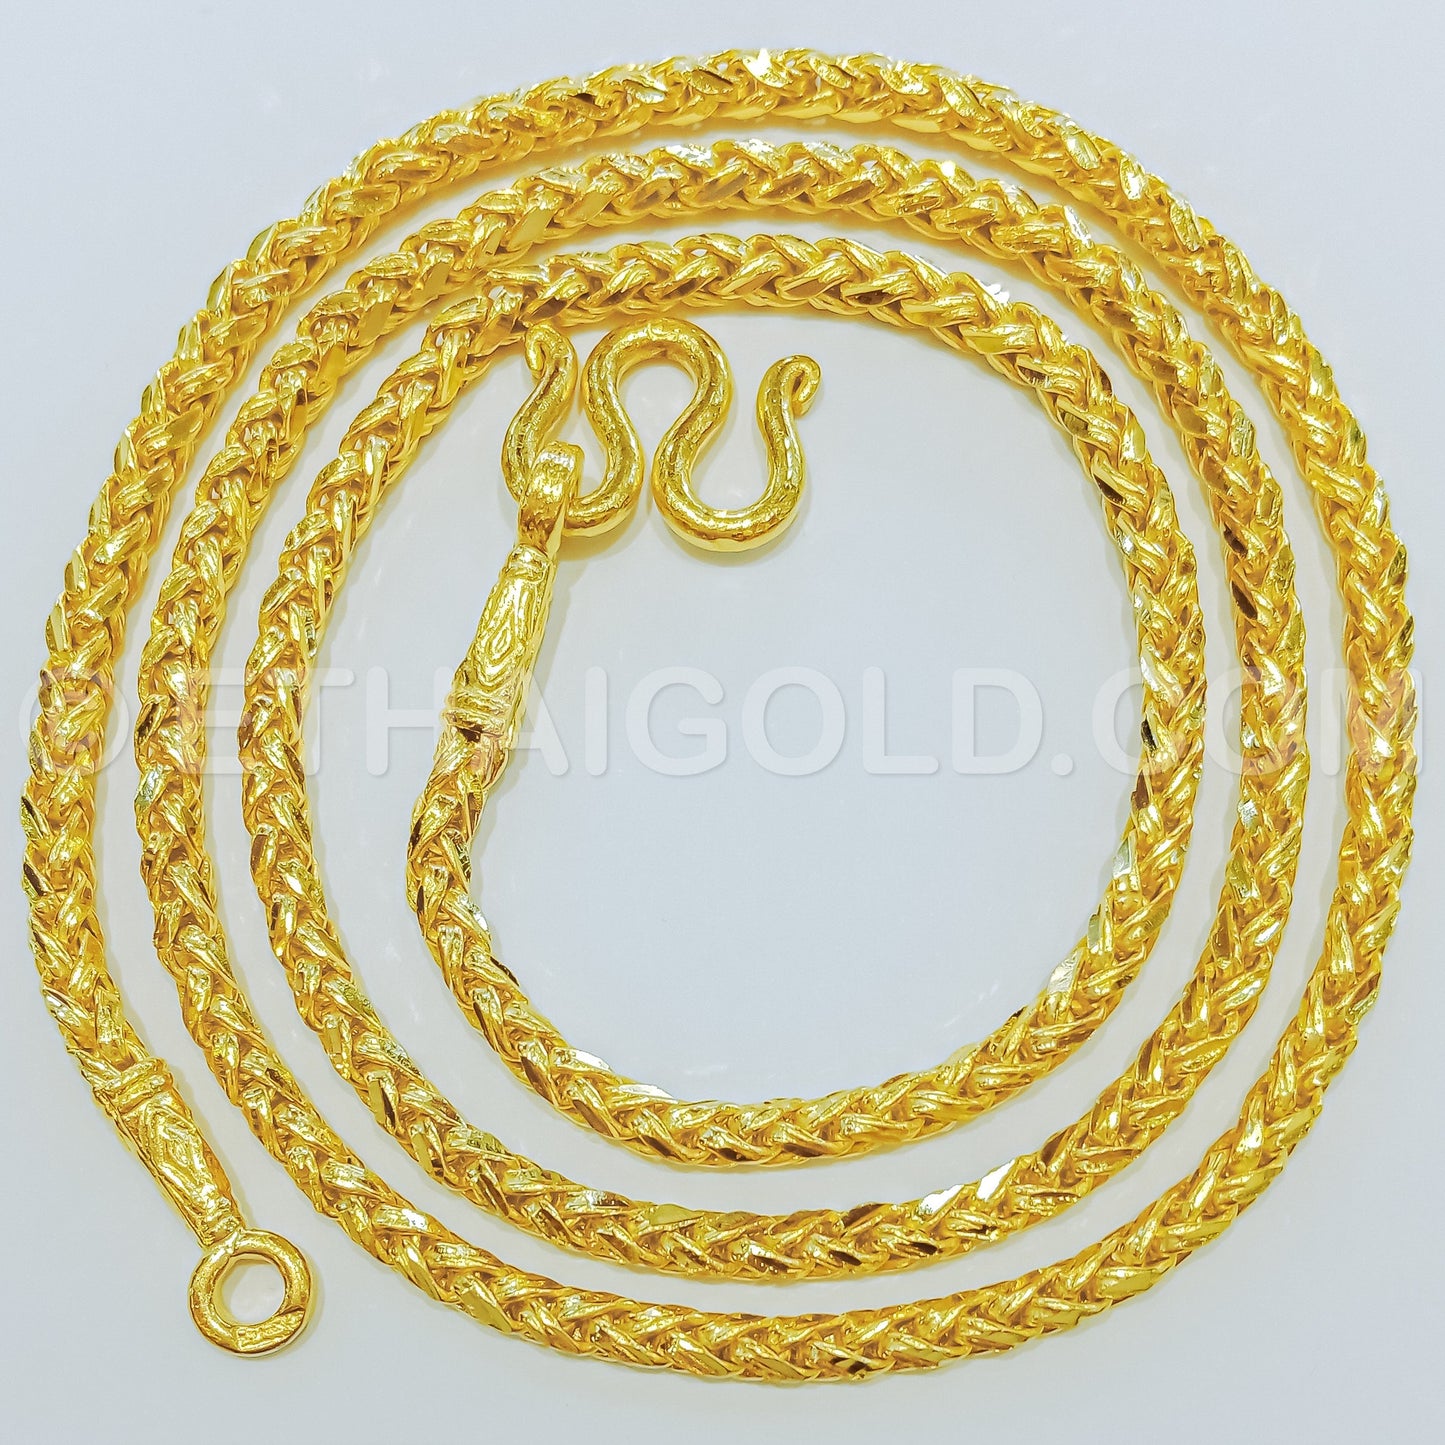 3 BAHT POLISHED DIAMOND-CUT SOLID PALMA CHAIN NECKLACE IN 23K GOLD (ID: N1503B)